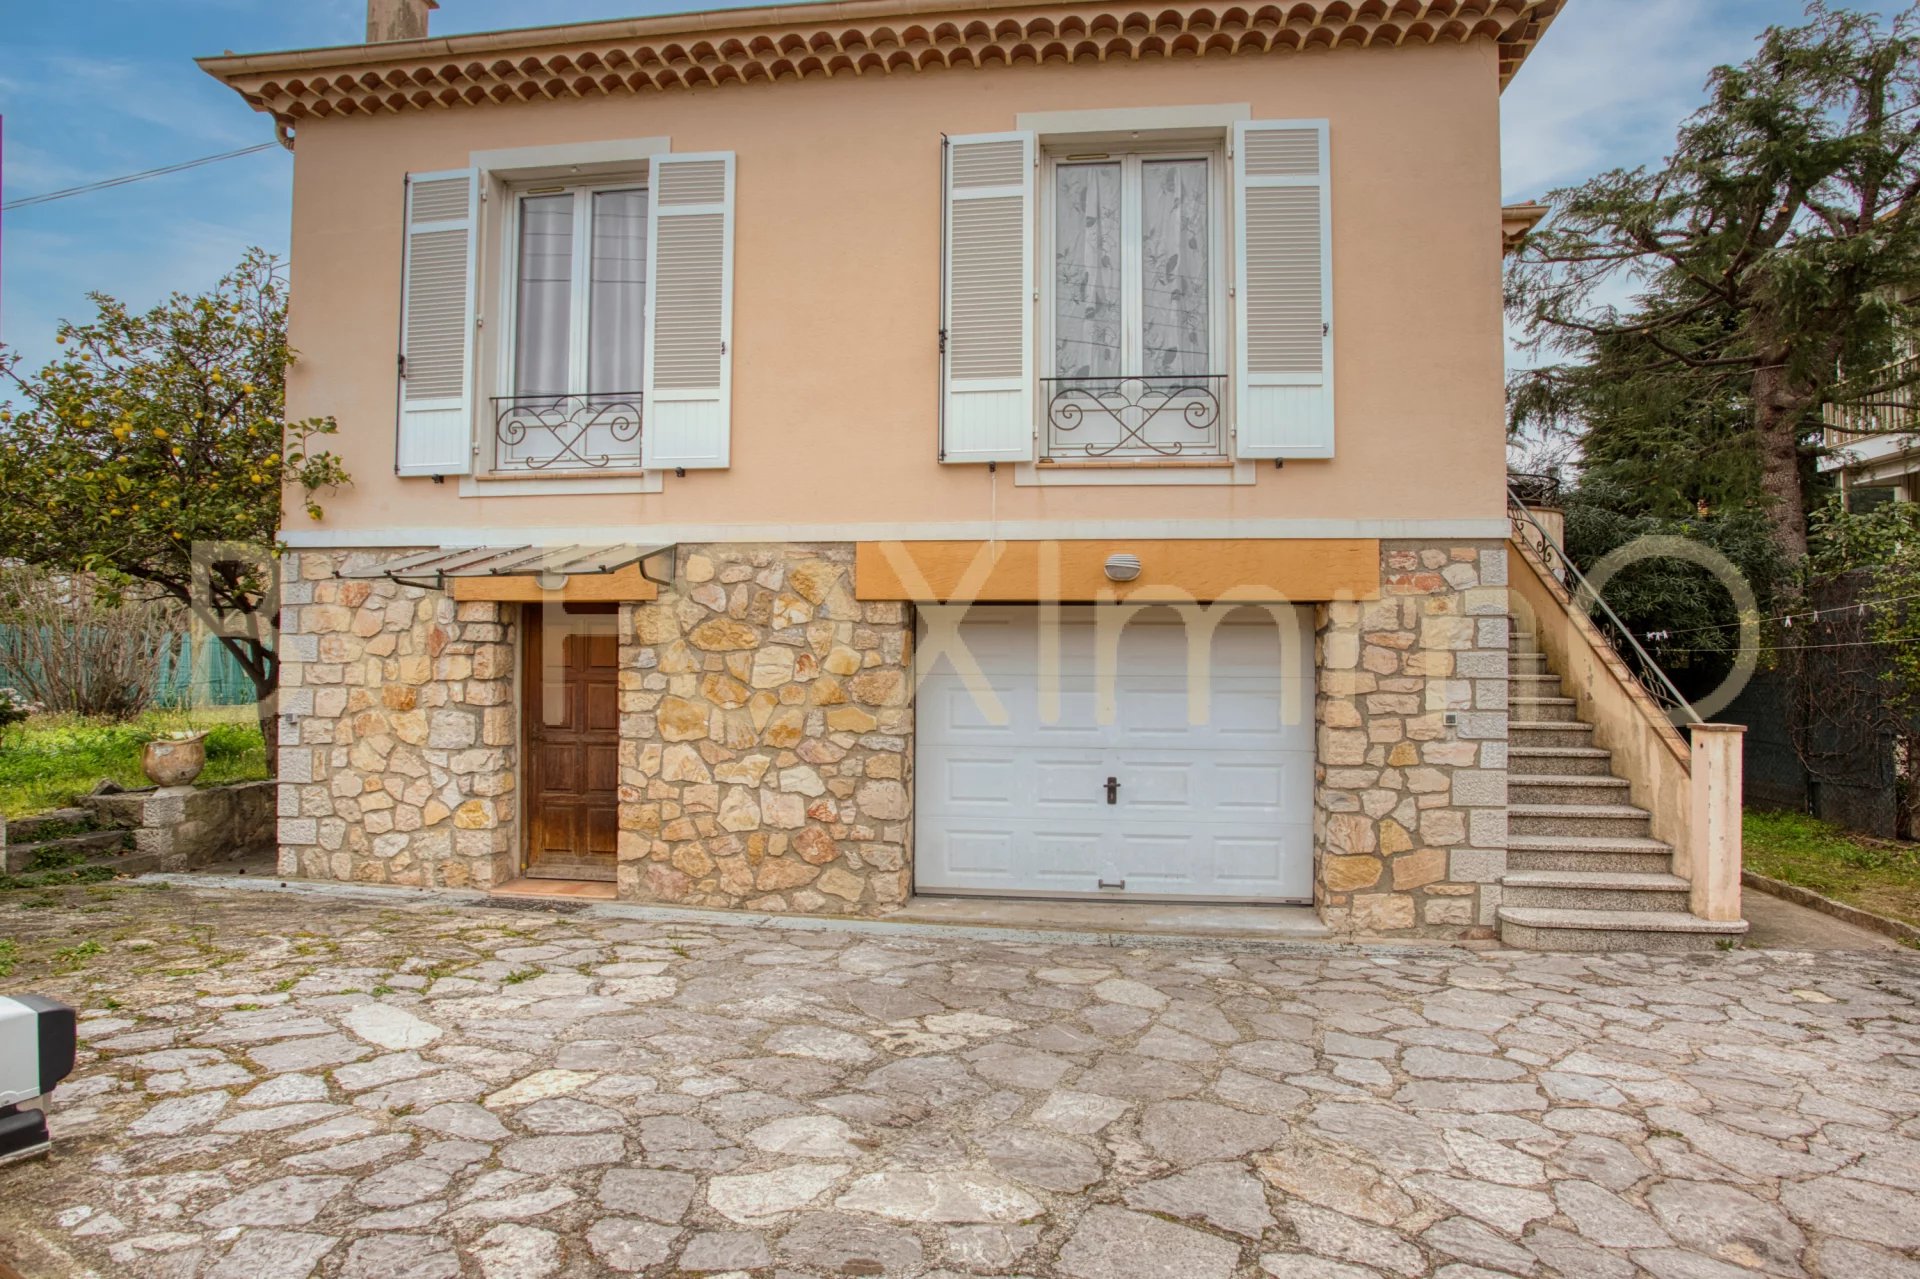 For sale French Riviera, Cannes, Detached house, 150sqm, 4 bedrooms, Garage Quiet, Flat garden, Swimming pool